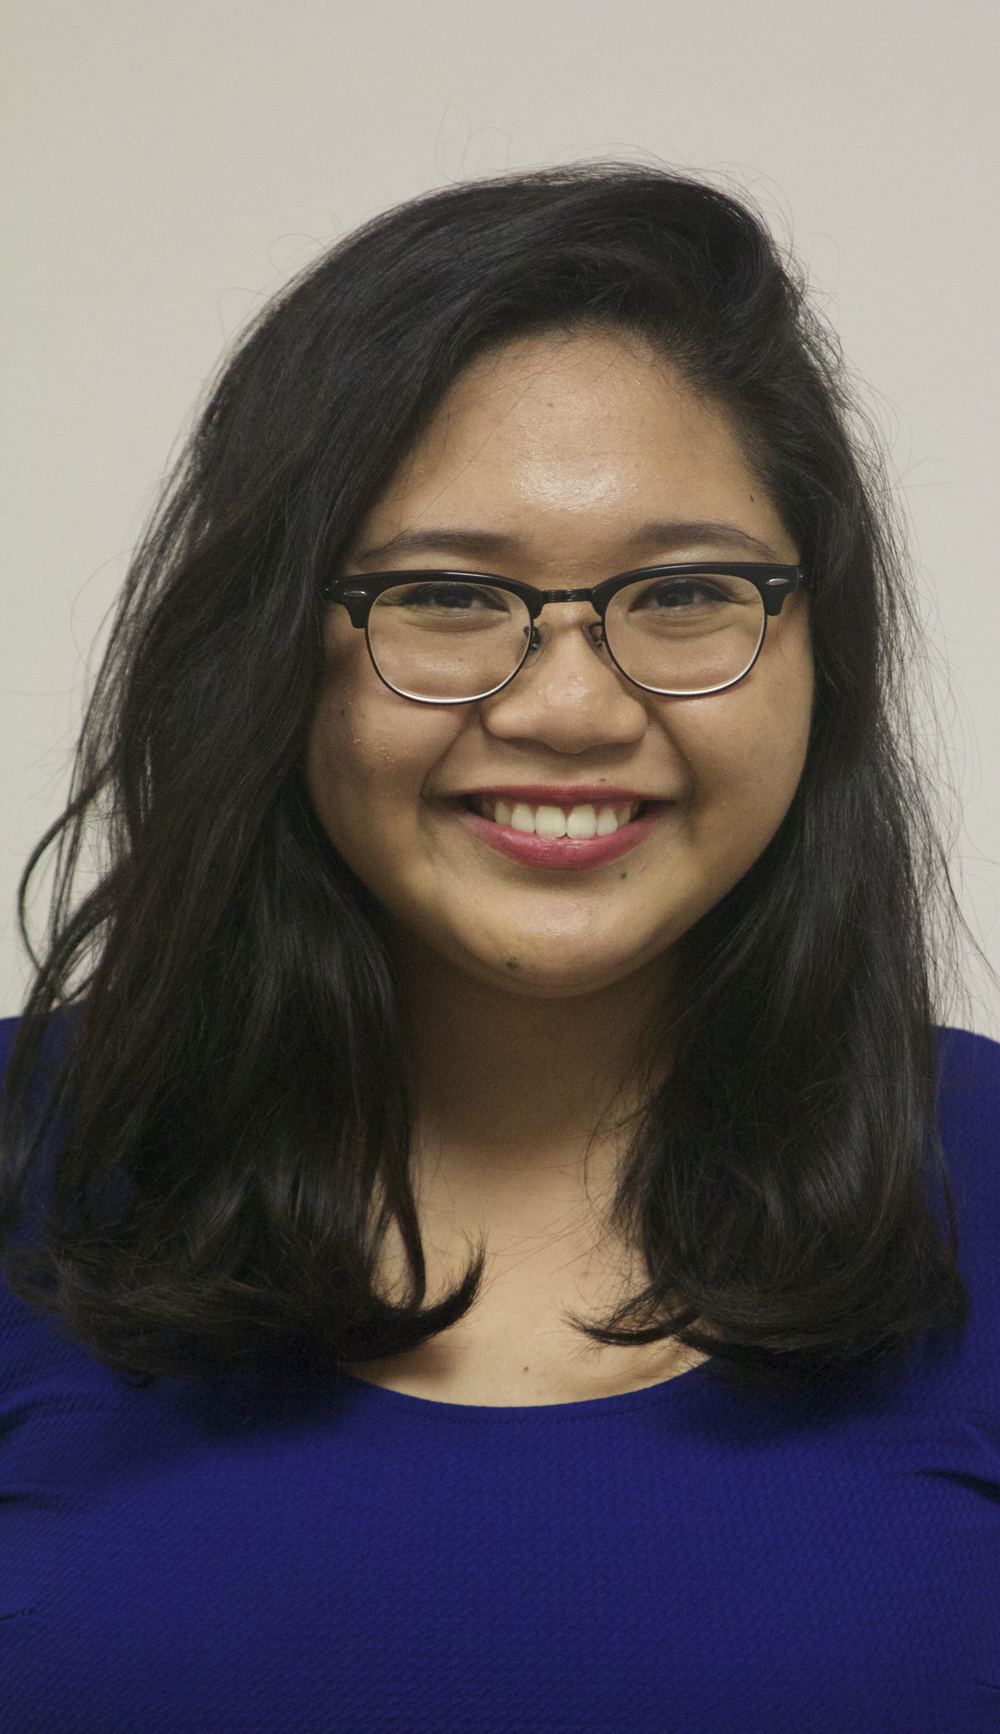 "CTL has empowered me both as an individual and as a leader. I have learned the importance of authenticity, empathy, and appreciating various leadership styles as equally valid and powerful." April Jingco | CTL Class of 2012 | McKinley High School